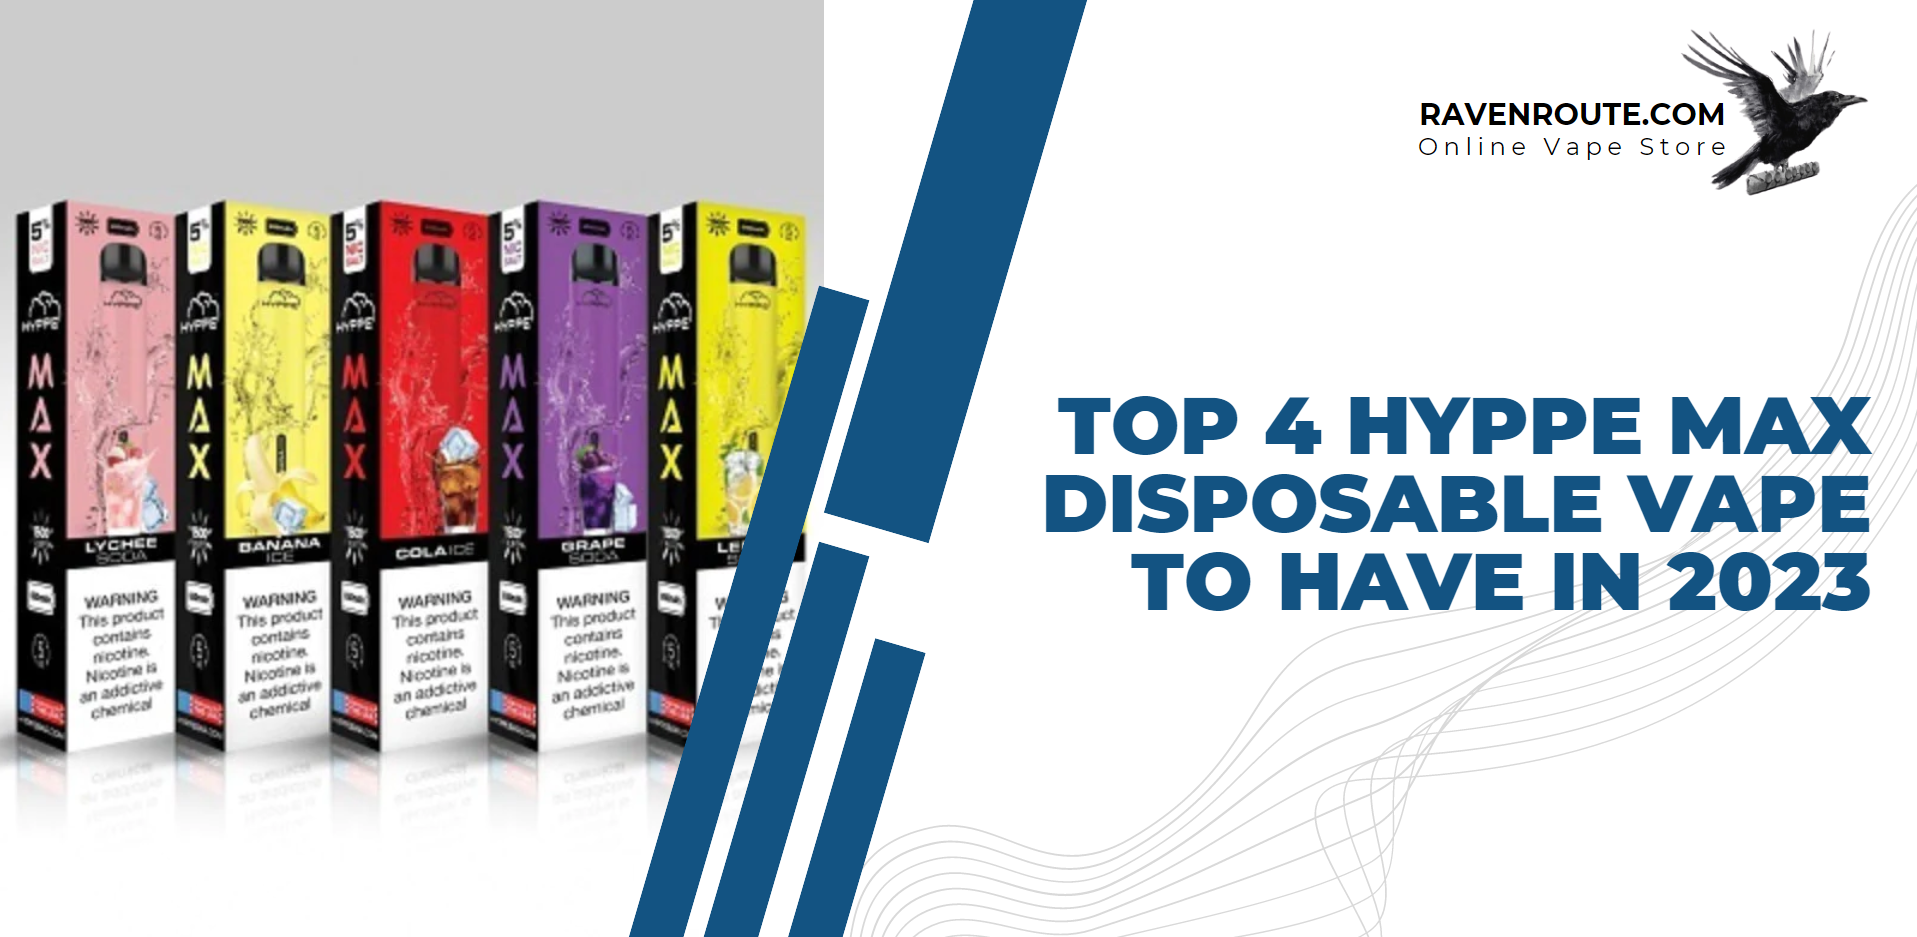 Top 4 Hyppe Max Disposable Vape To have In 2023